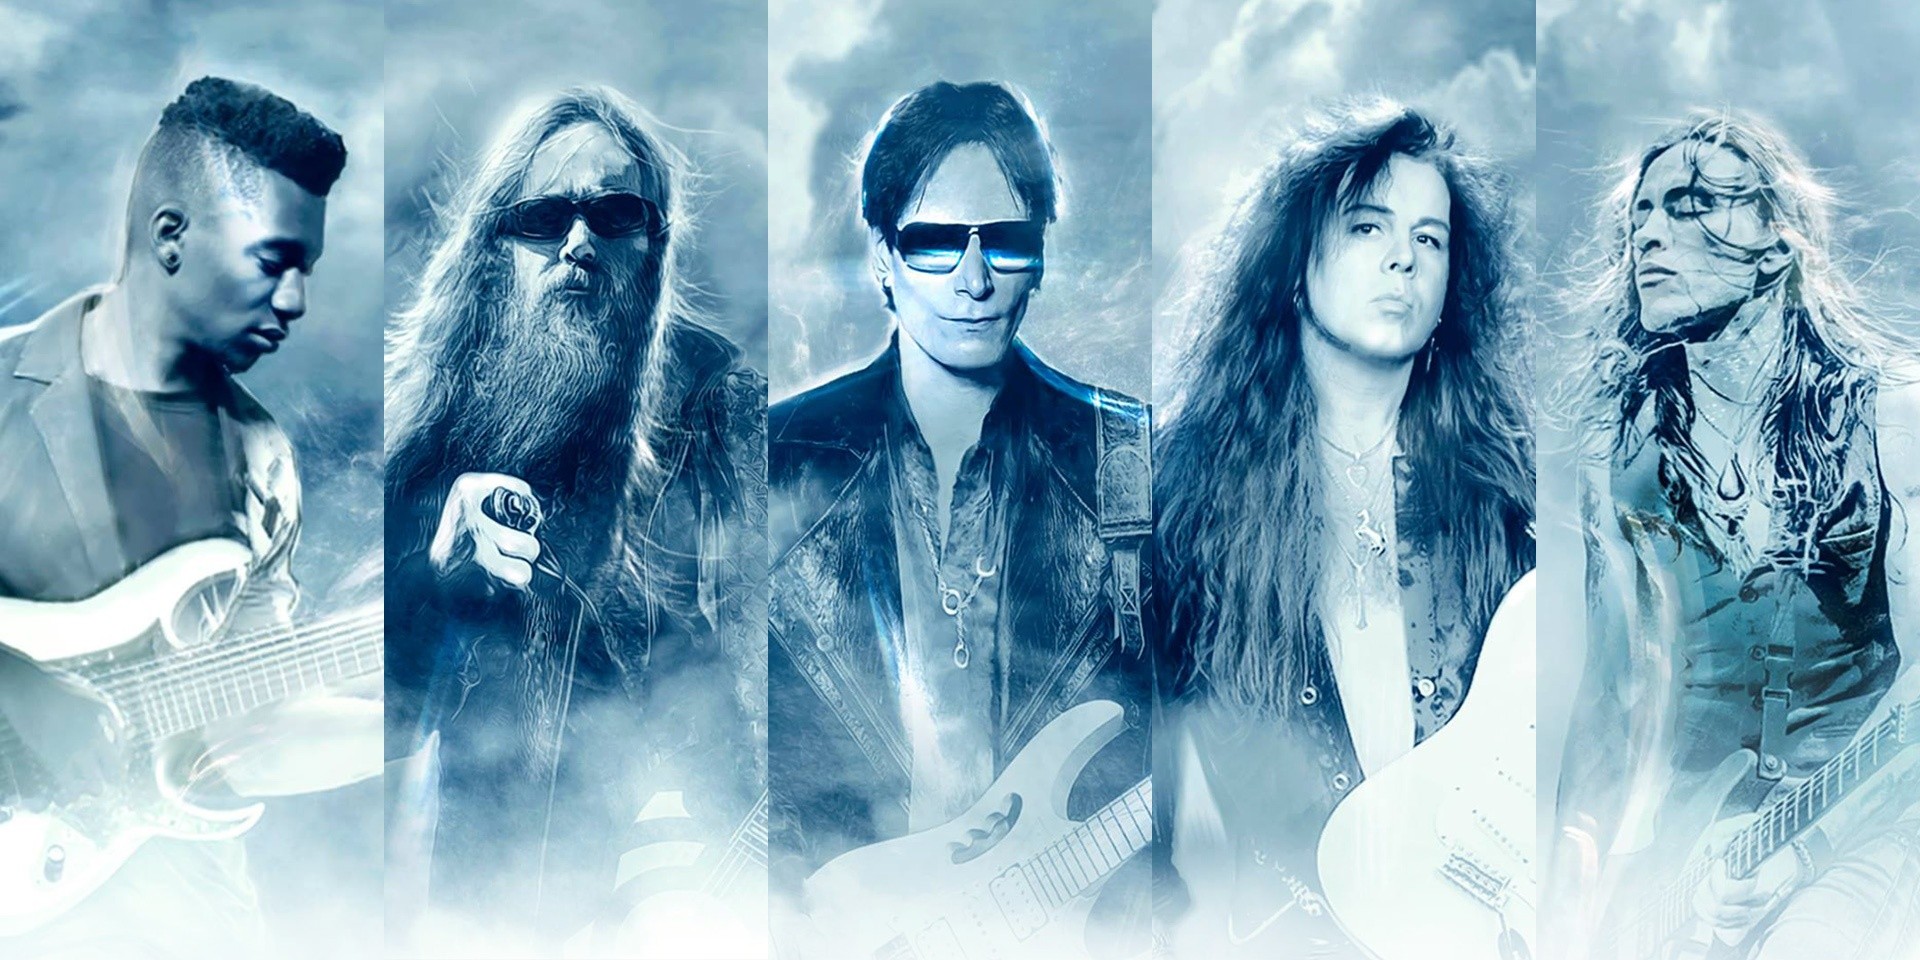 Steve Vai: "It didn't take much convincing" to form Generation Axe